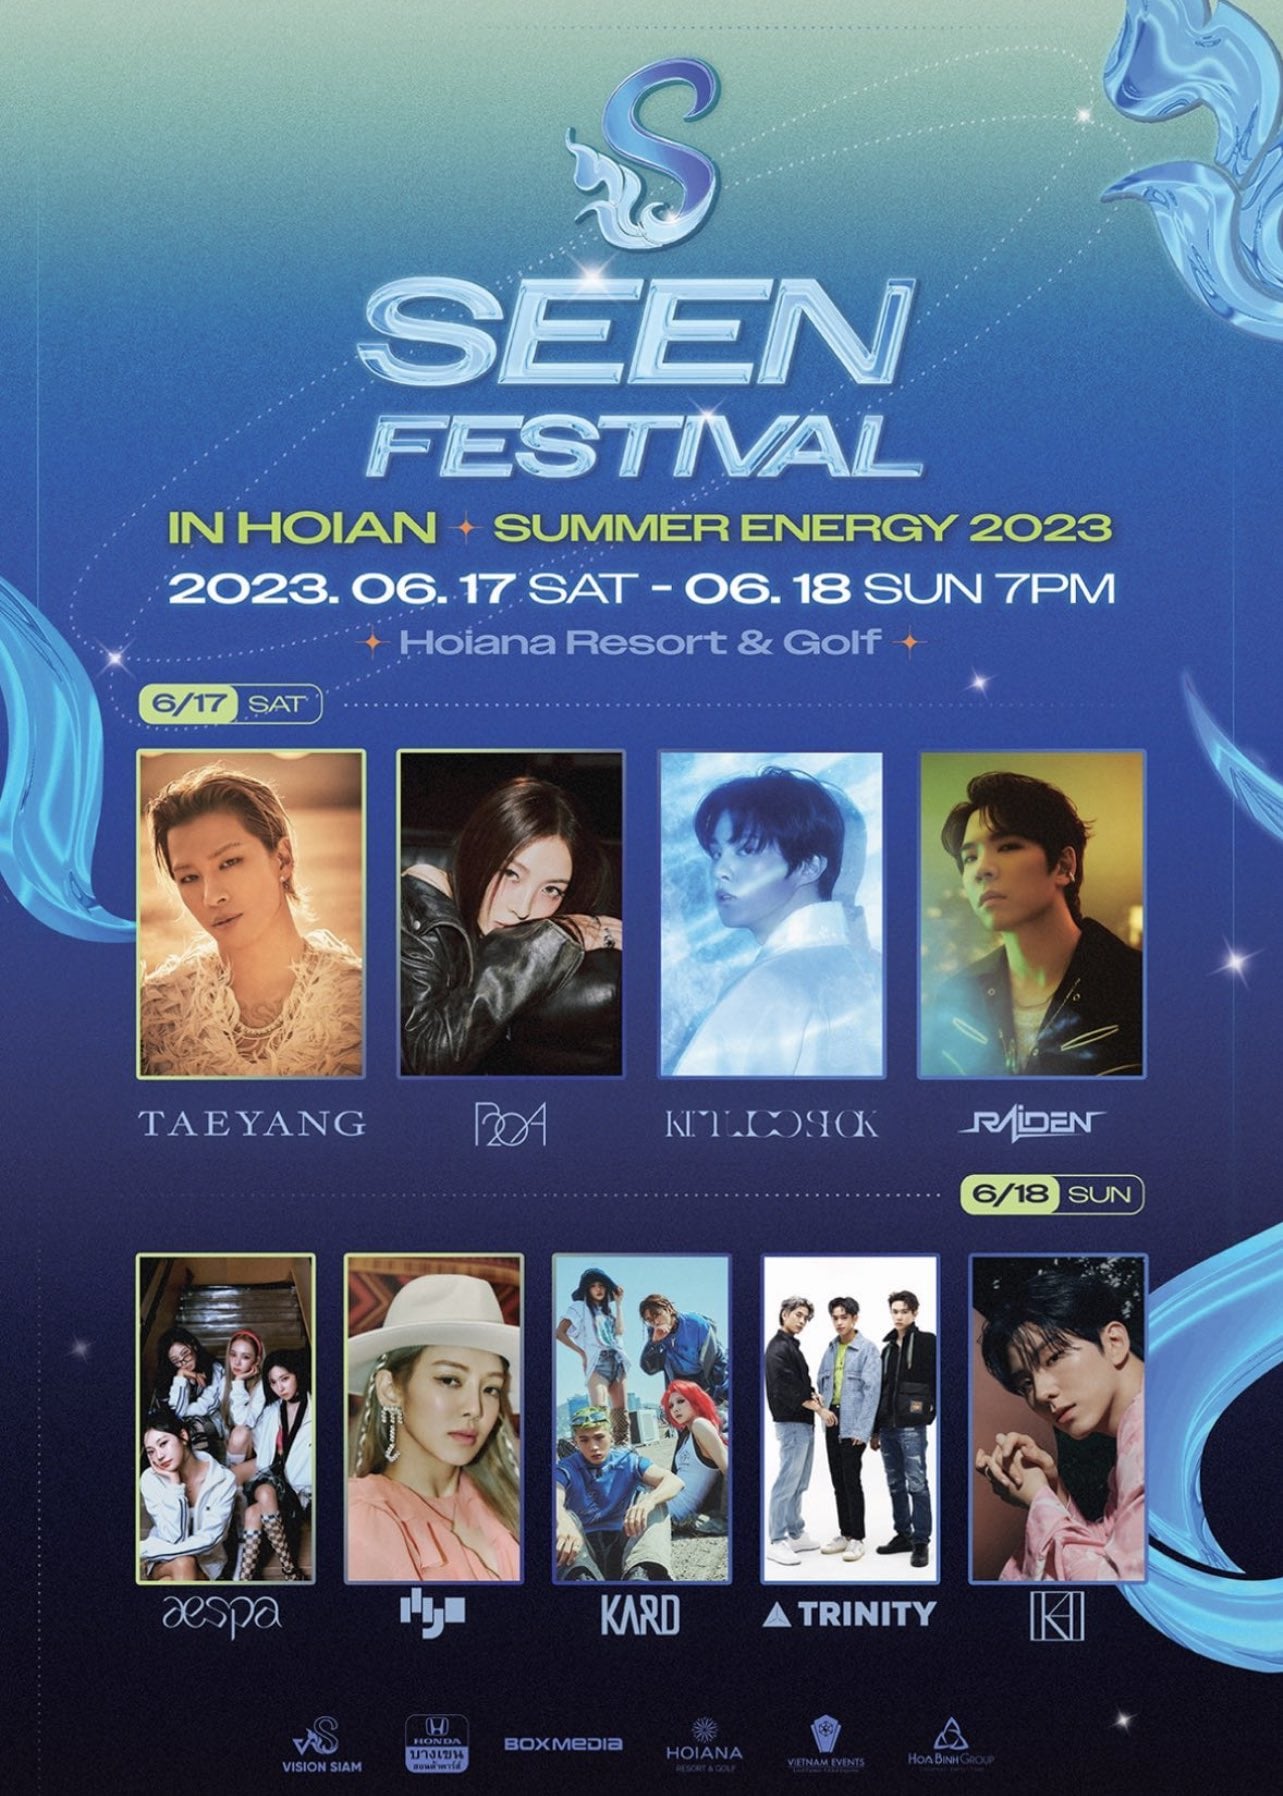 230524 aespa will perform at Seen Festival in Vietnam on June 18, 2023